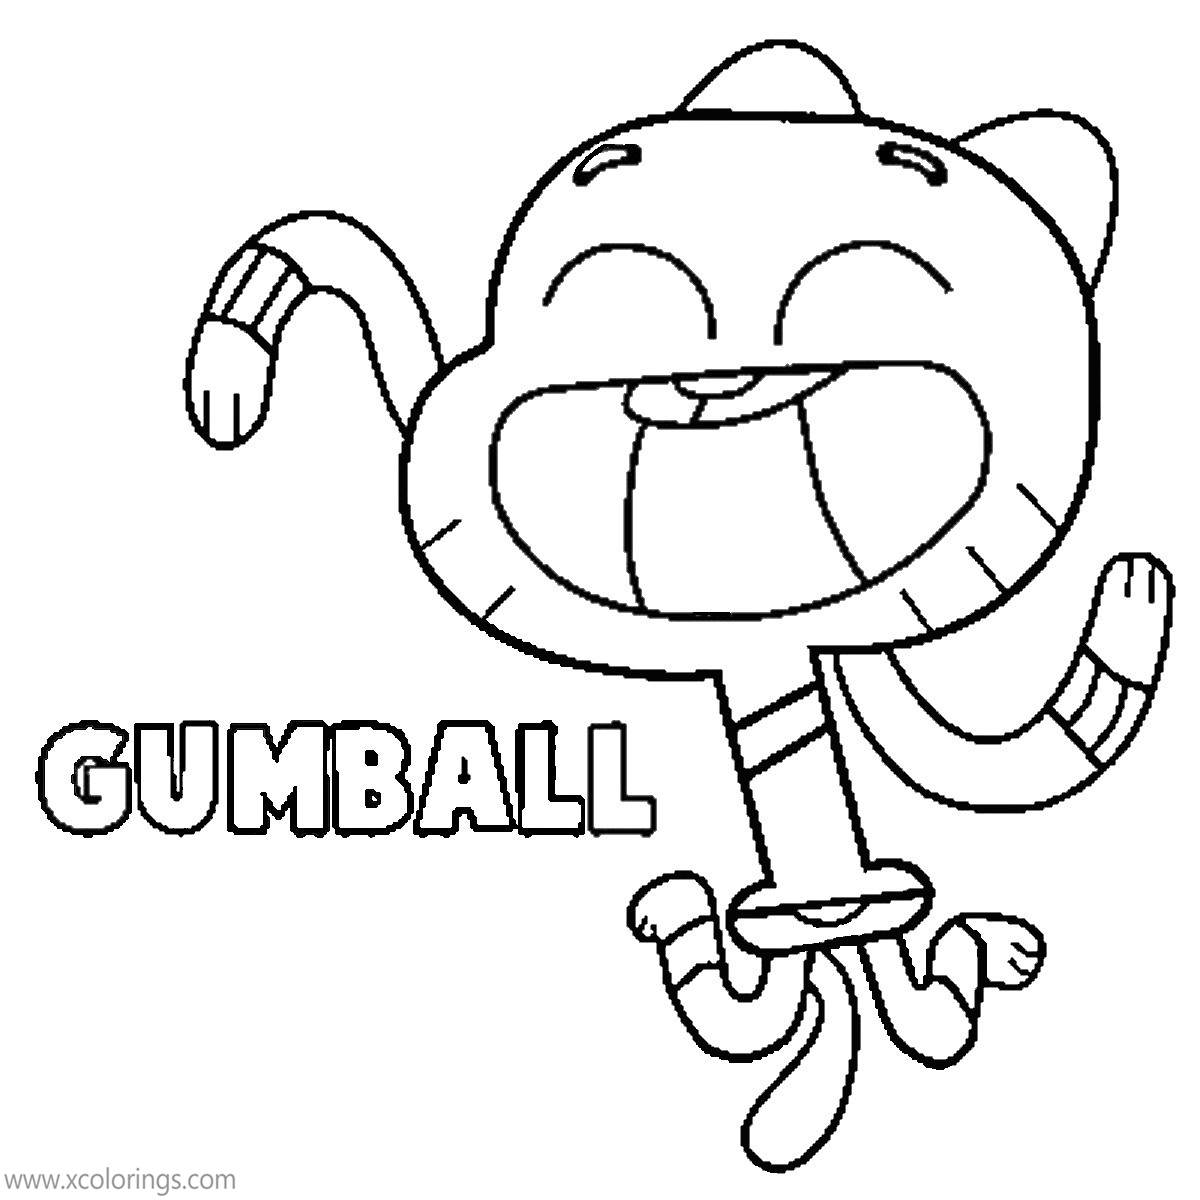 Free The Amazing World of Gumball Coloring Pages Gumball is Dancing printable